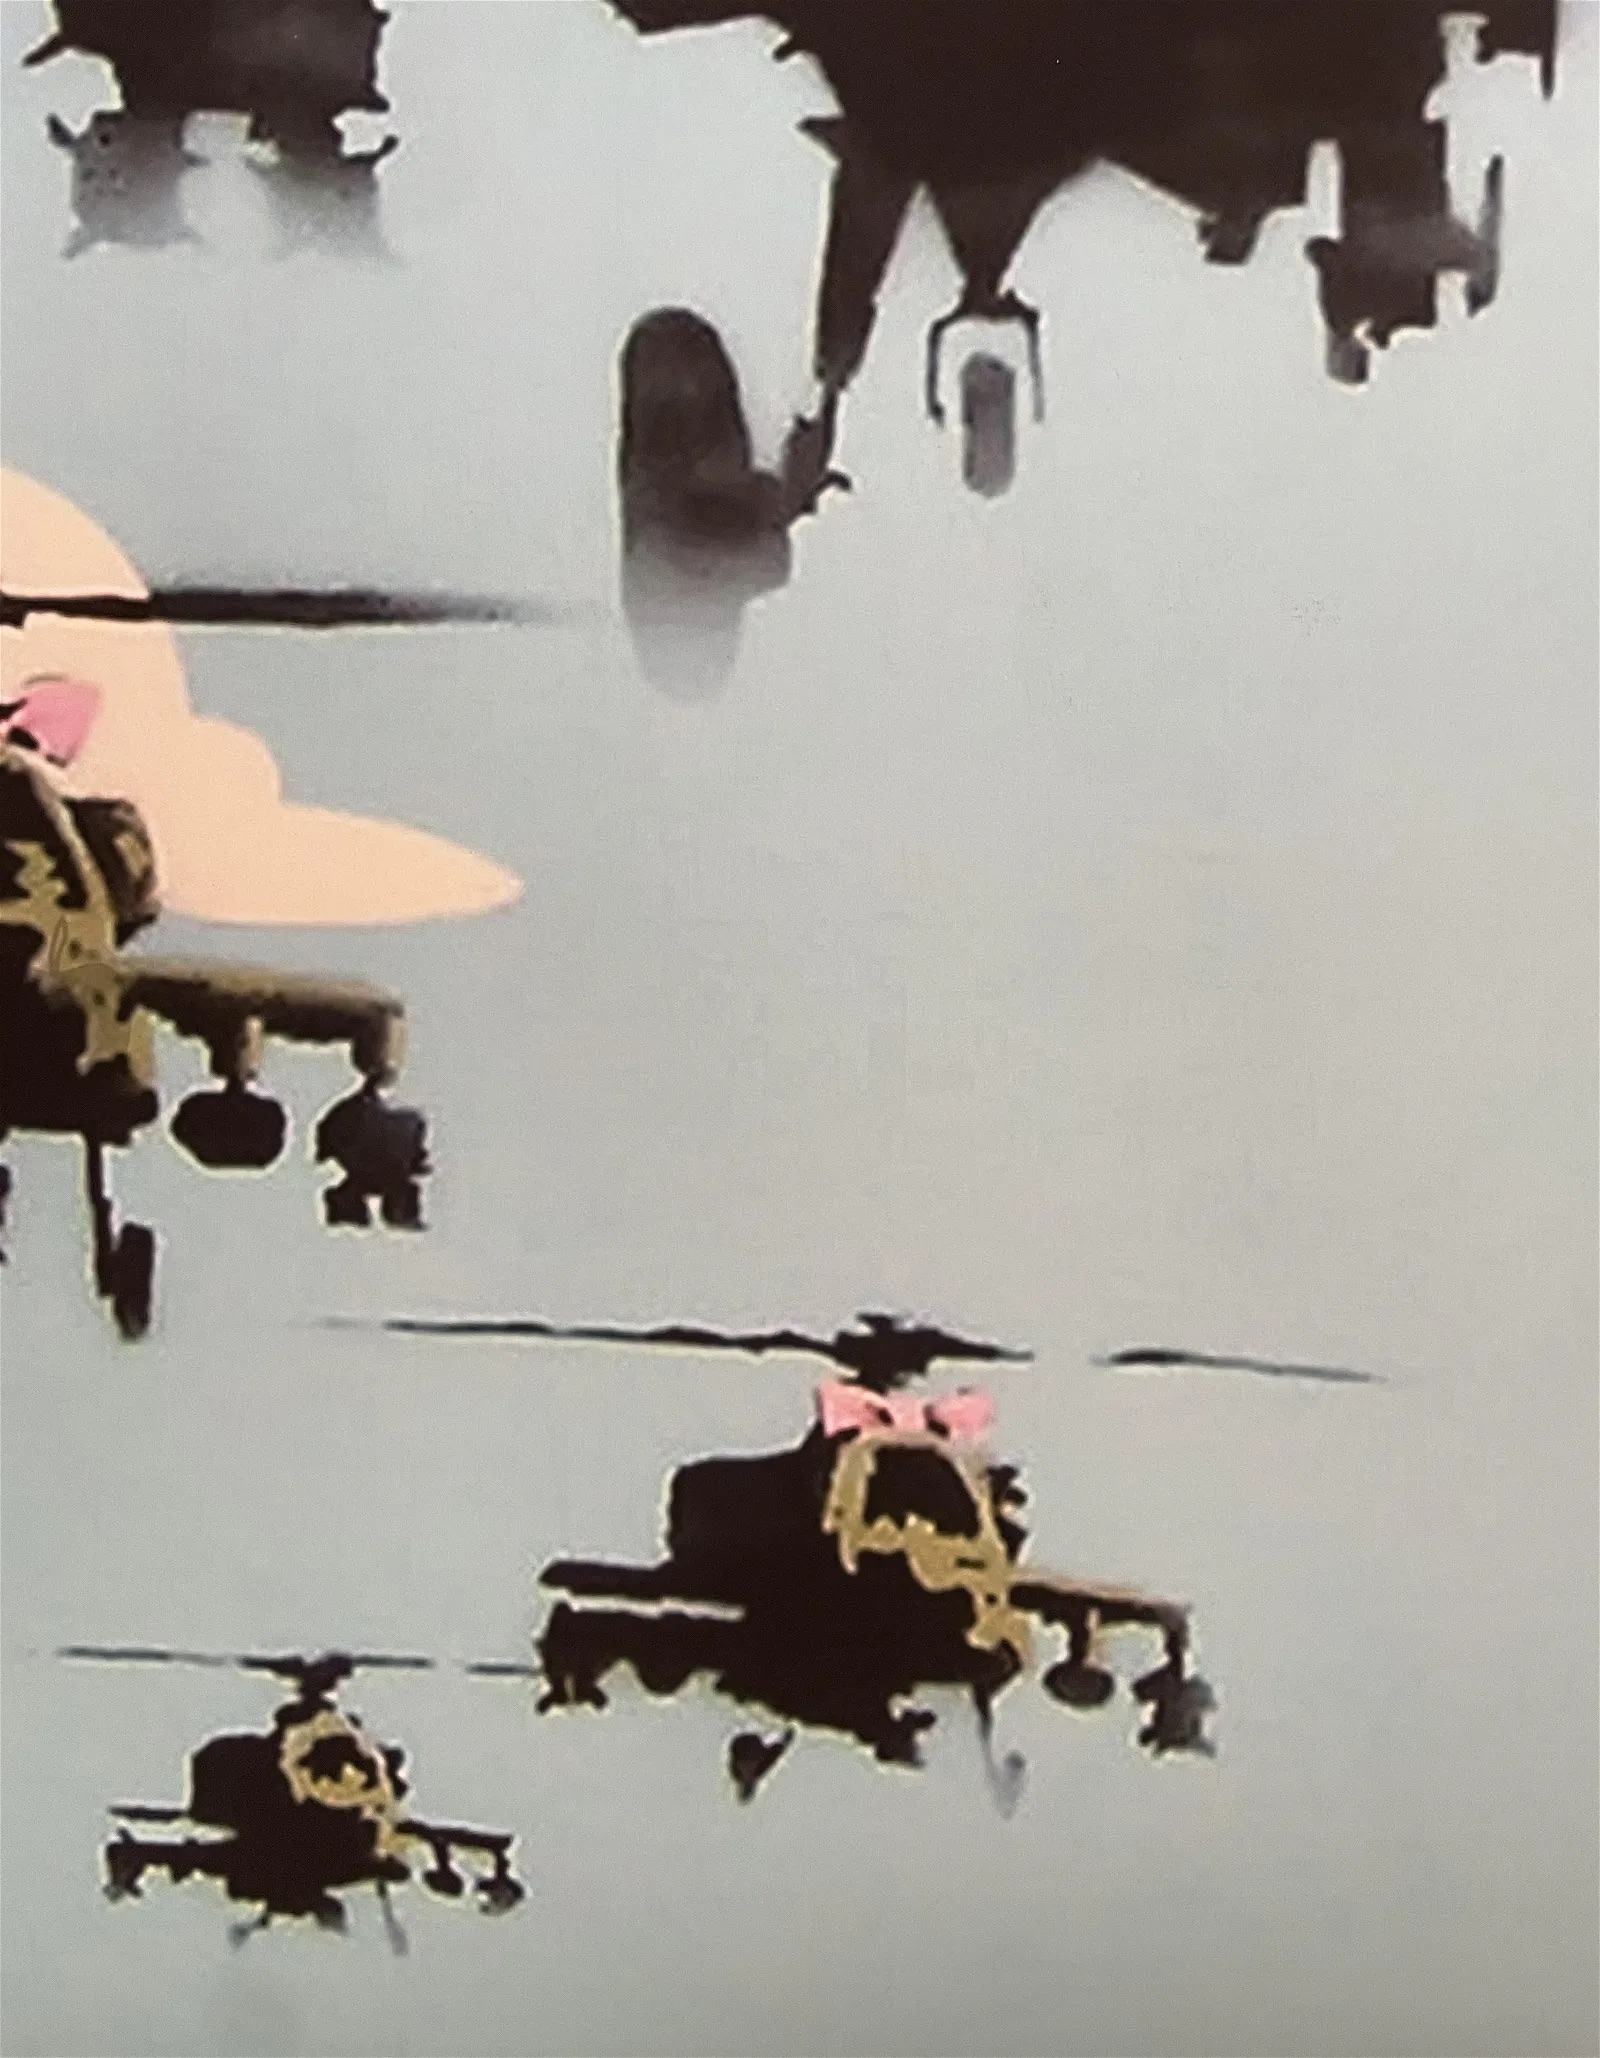 Banksy "Helicopter" Offset Lithograph - Image 6 of 8